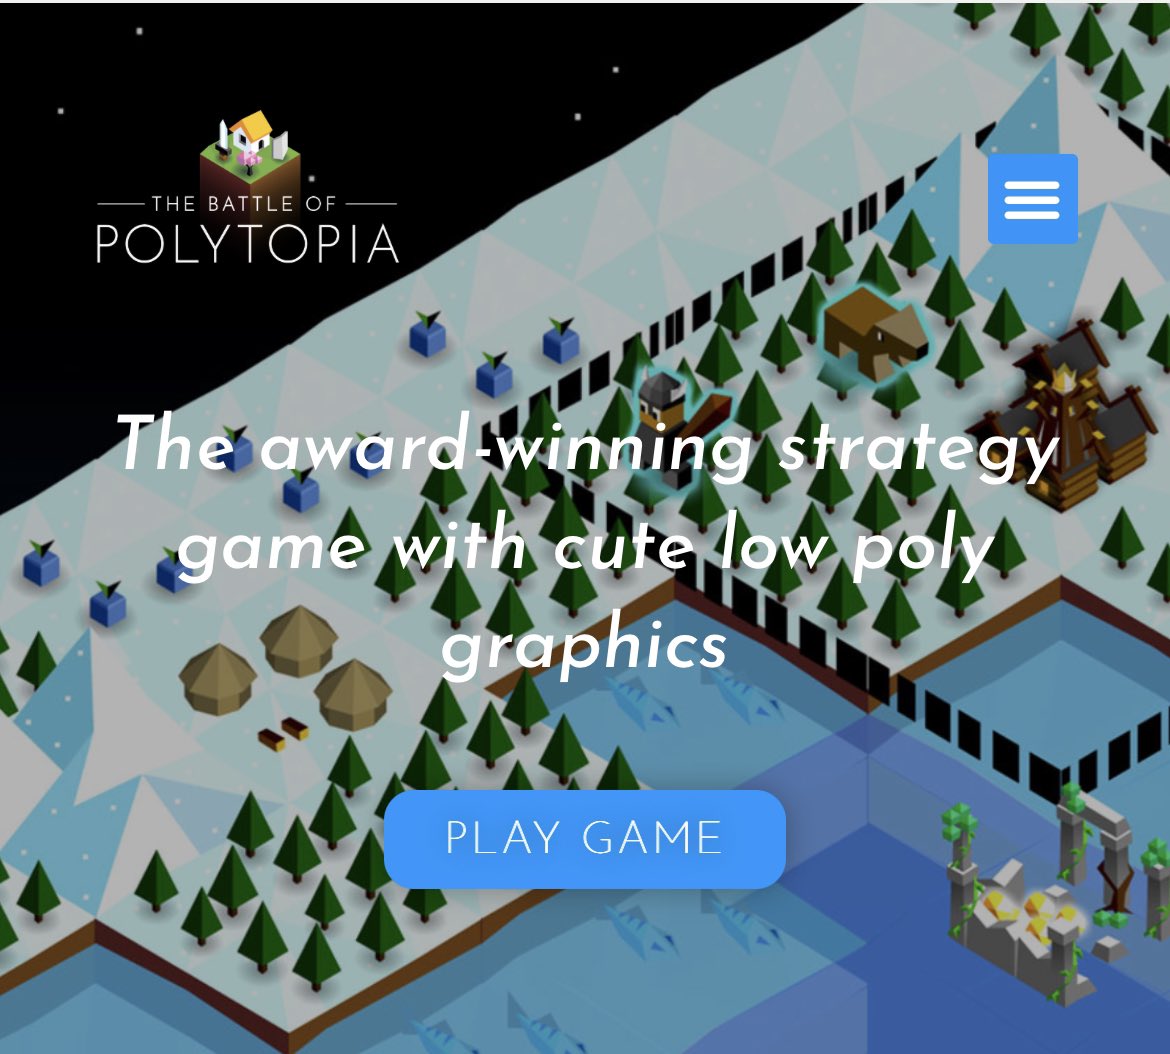 me before reading isaacson’s “elon musk”:

“to understand elon i will need to read this and think from first principles”

me after (binge-skimming) the book:

“to understand elon i will have to play polytopia”